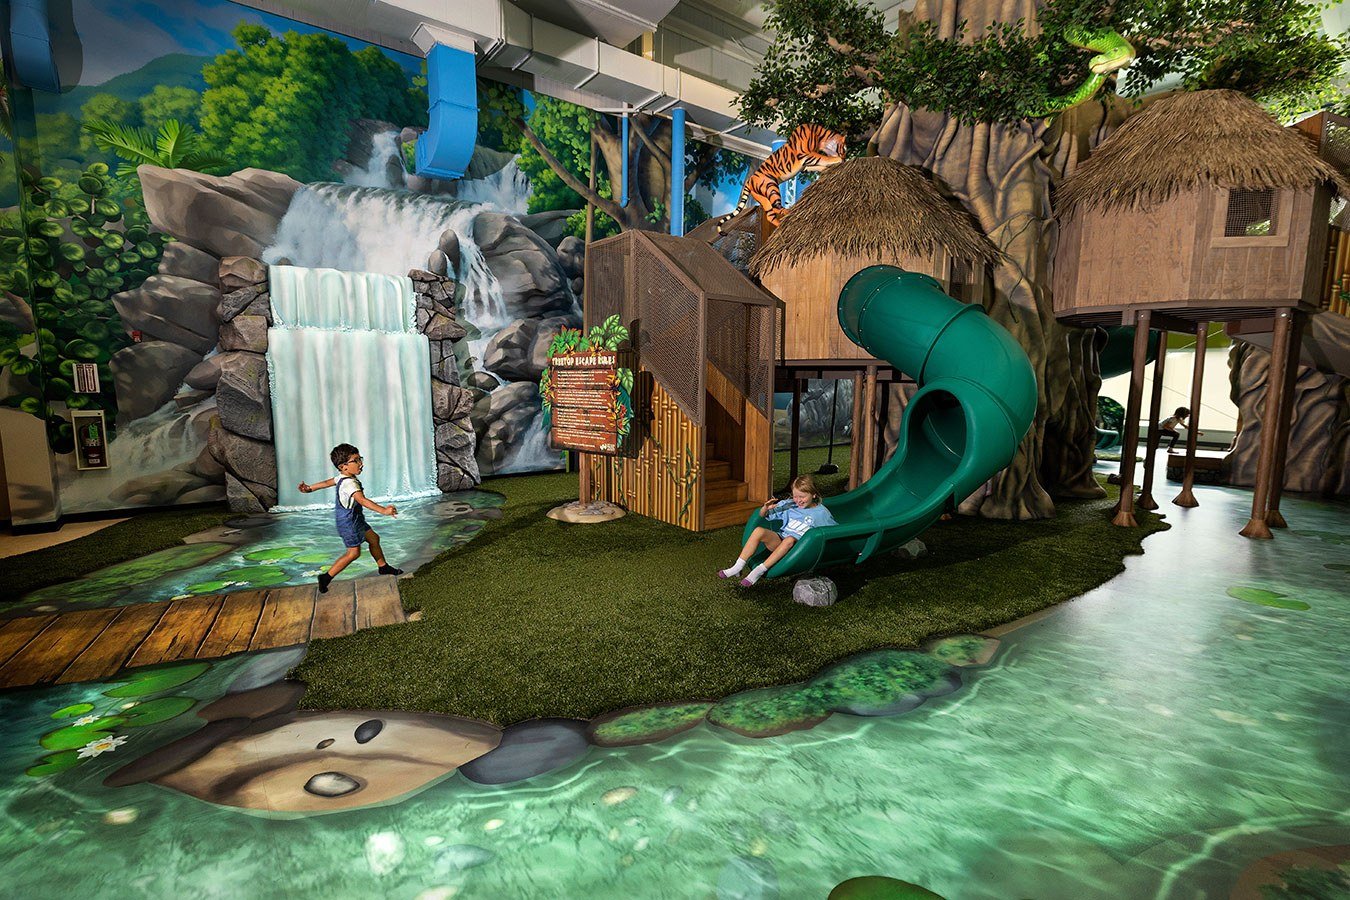 Giant waterfall, animated river, treehouse and slides feature at West Chicago Parks District ARC Center